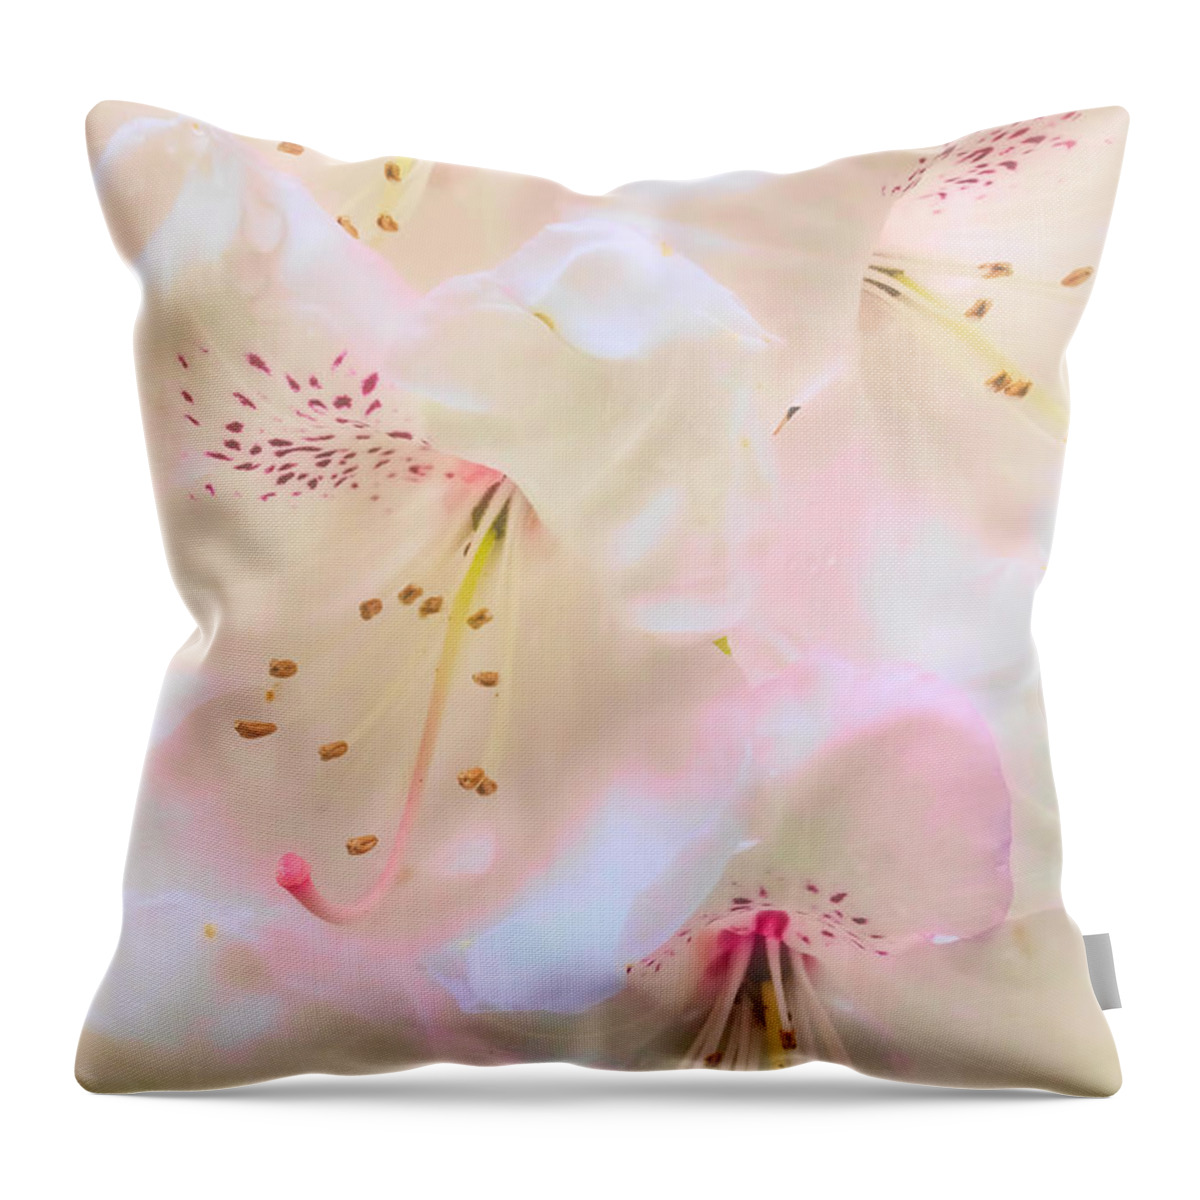  Flower Throw Pillow featuring the digital art Pearls by Carl H Payne